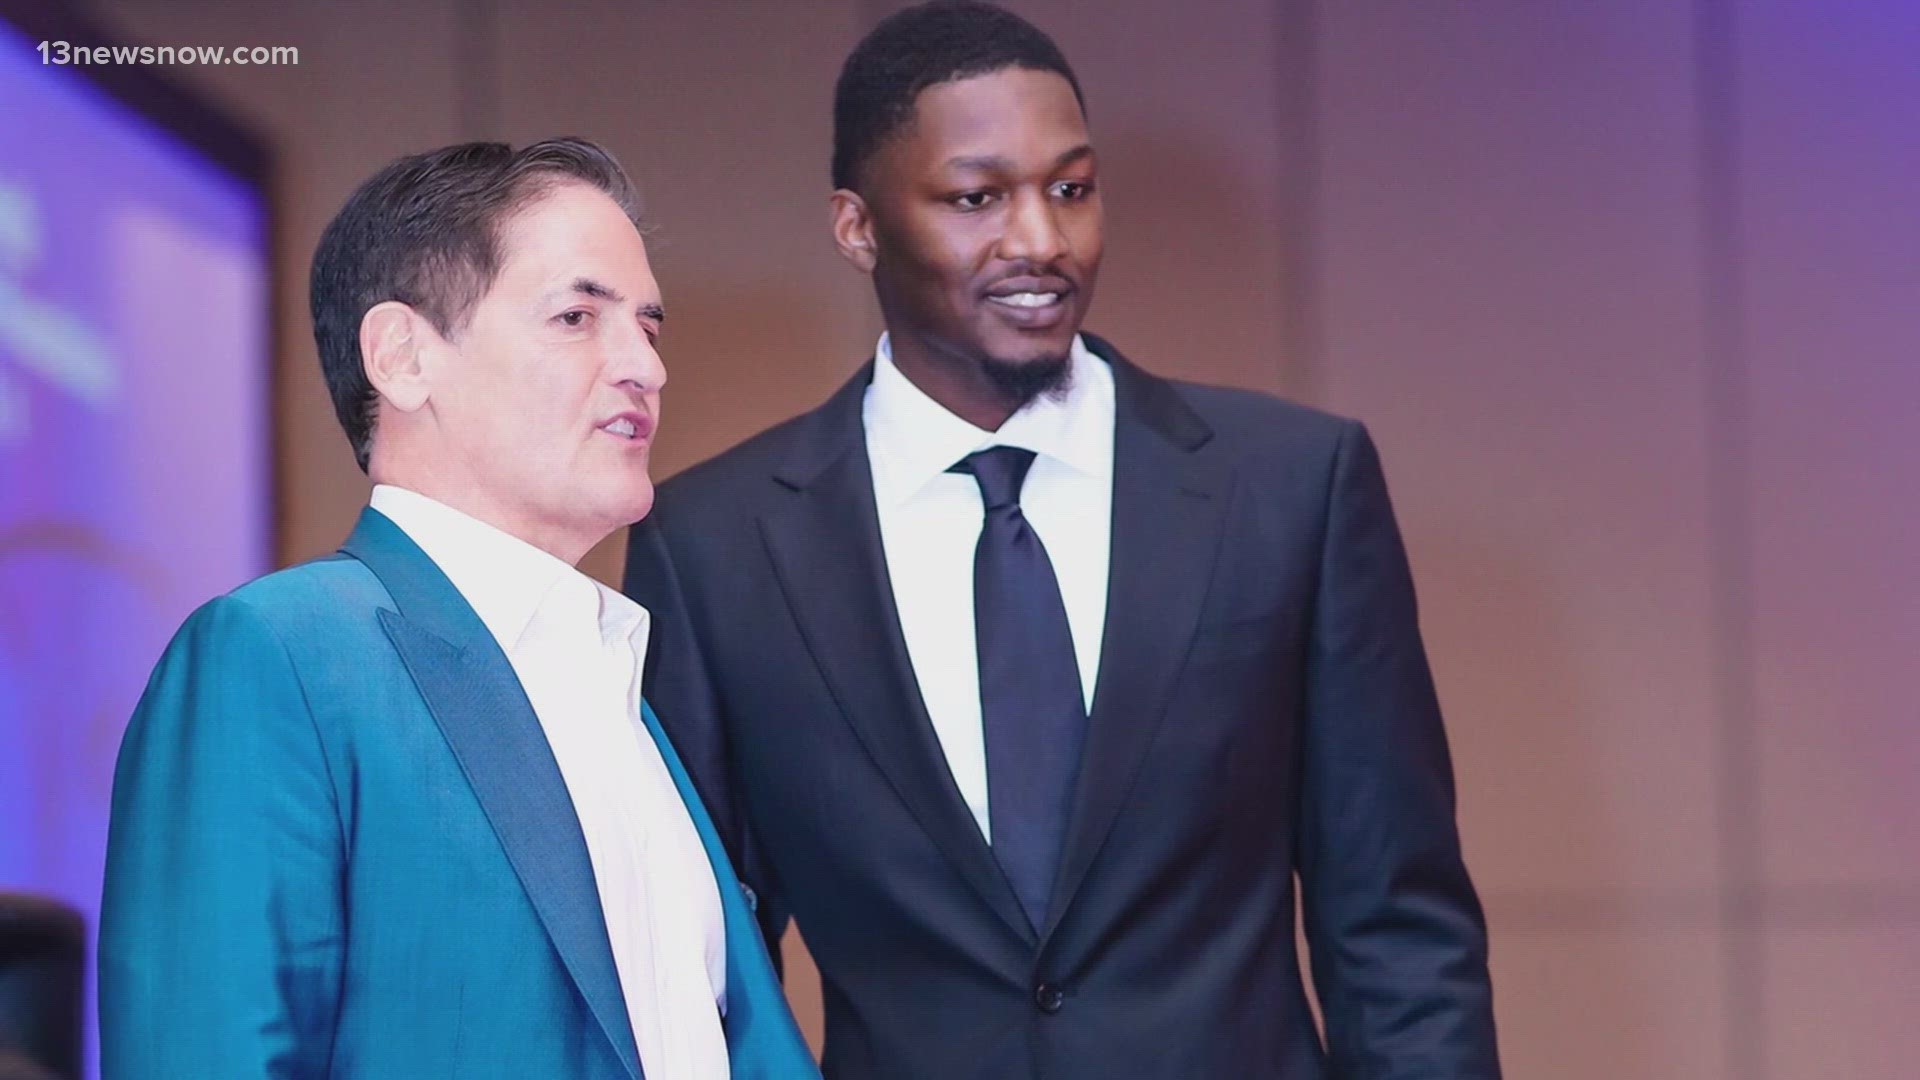 Portsmouth native and NBA player Dorian Finney Smith is hosting a Hampton Roads Black Tie Gala in Portsmouth this weekend!